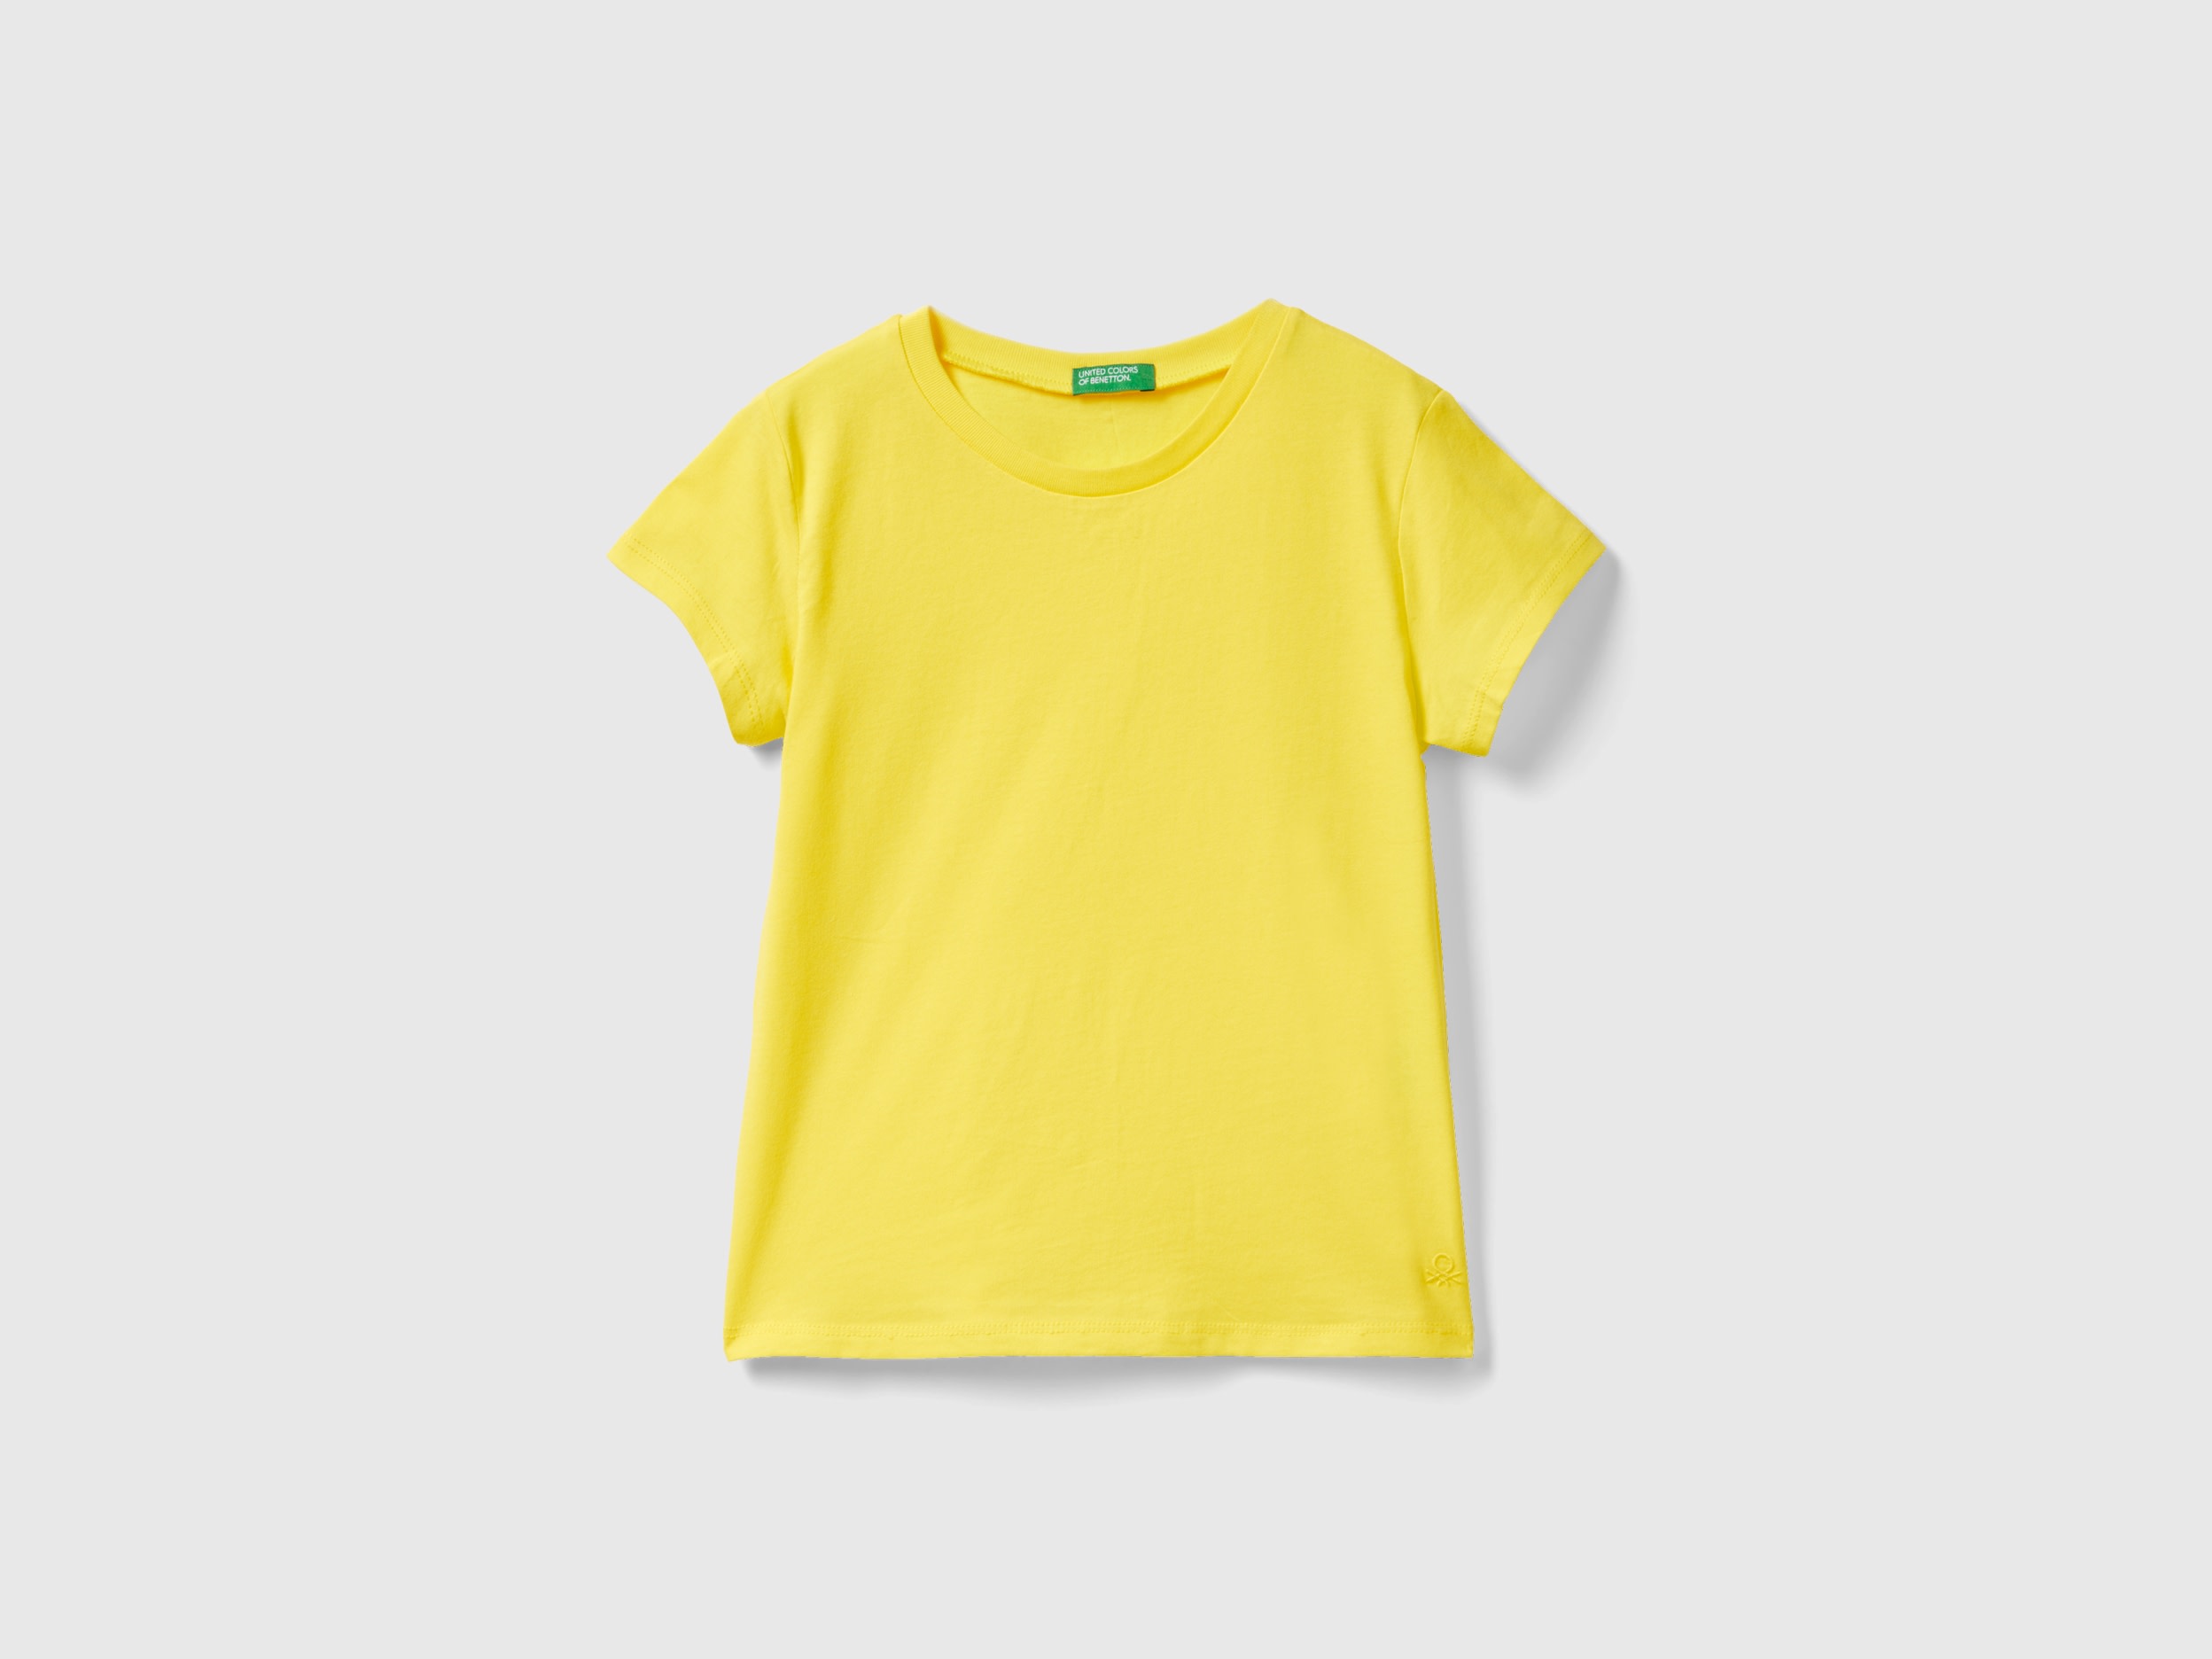 Image of Benetton, T-shirt In Pure Organic Cotton, size S, Yellow, Kids